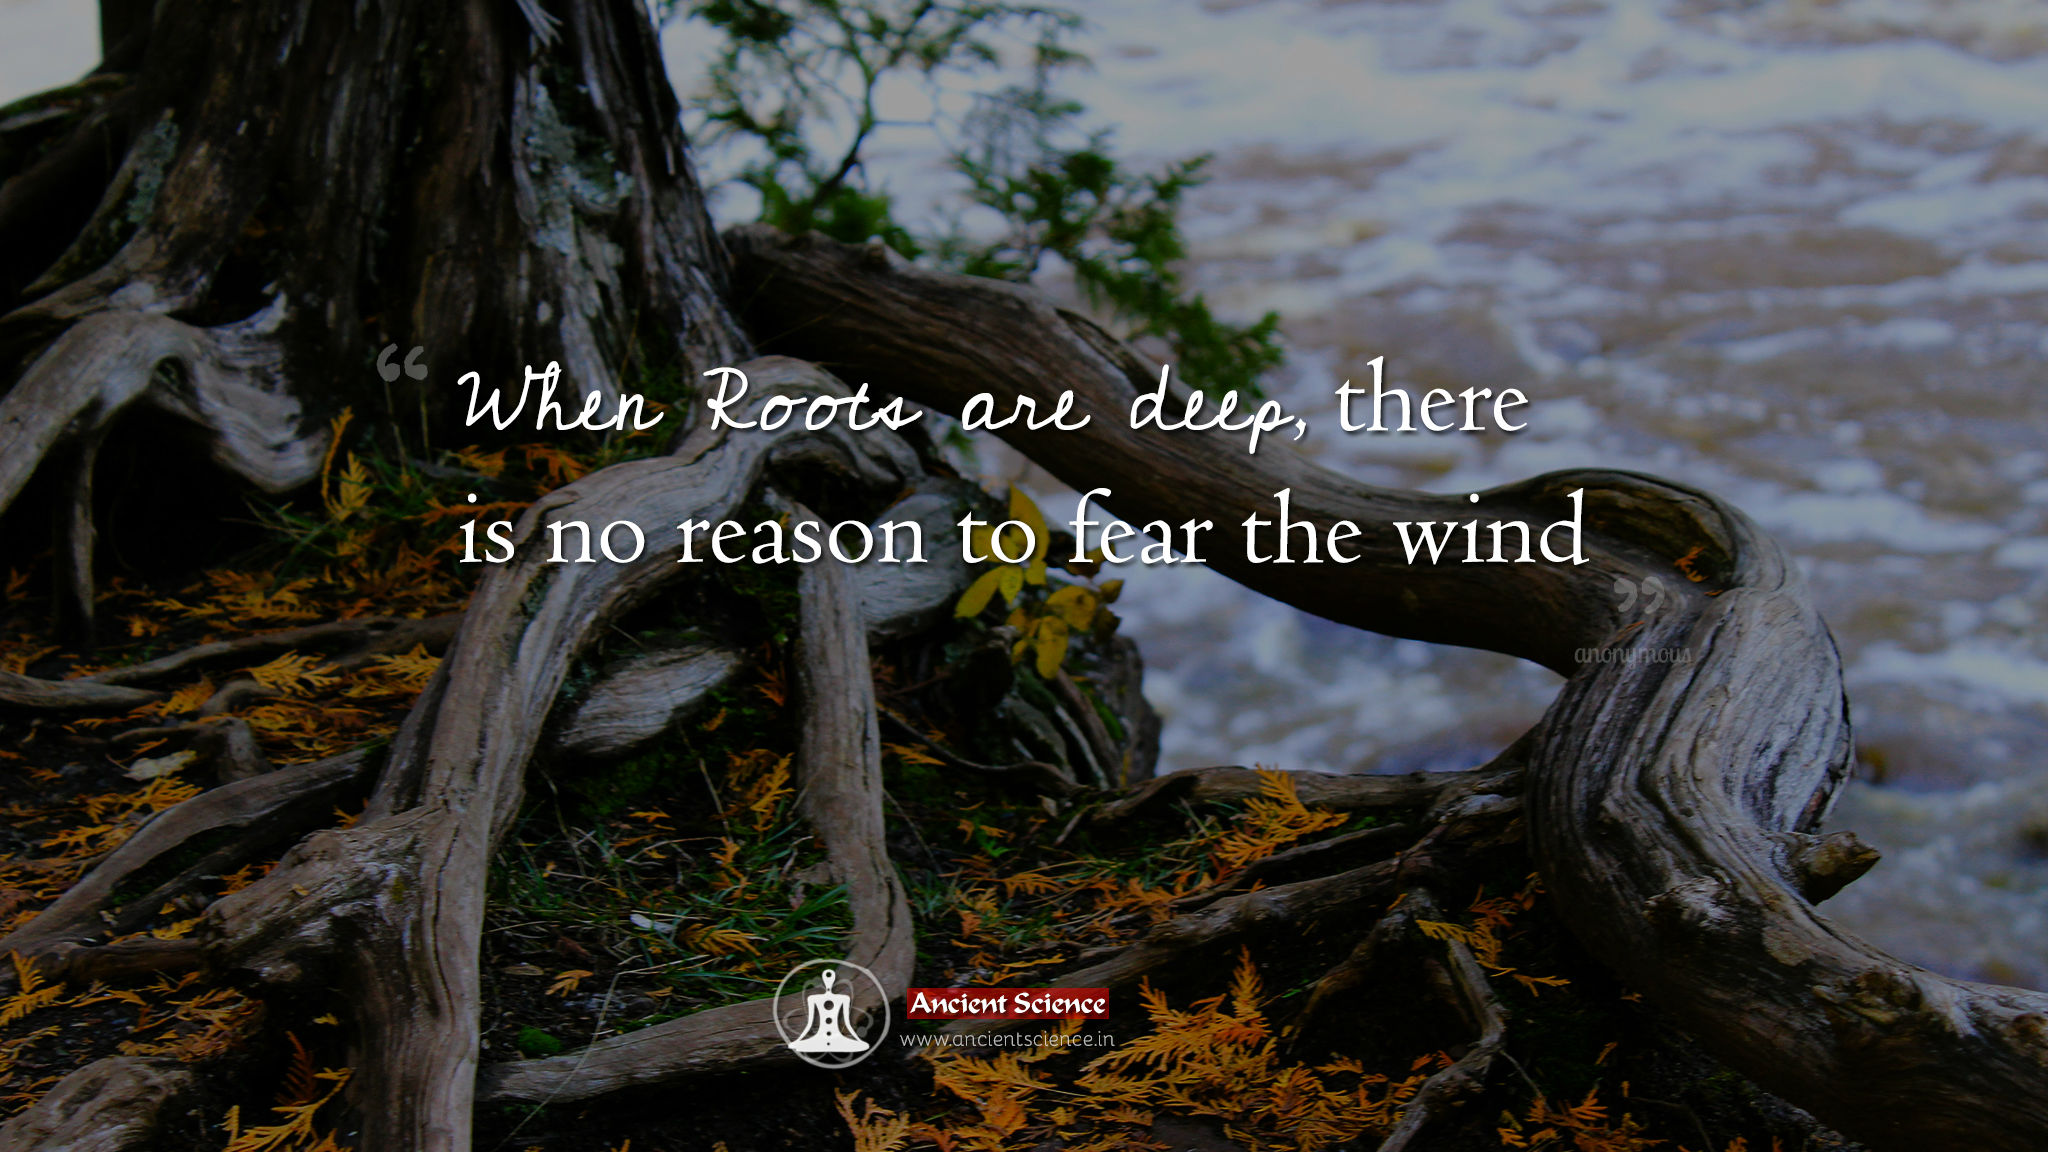 When roots are deep, there is no reason to fear the wind.